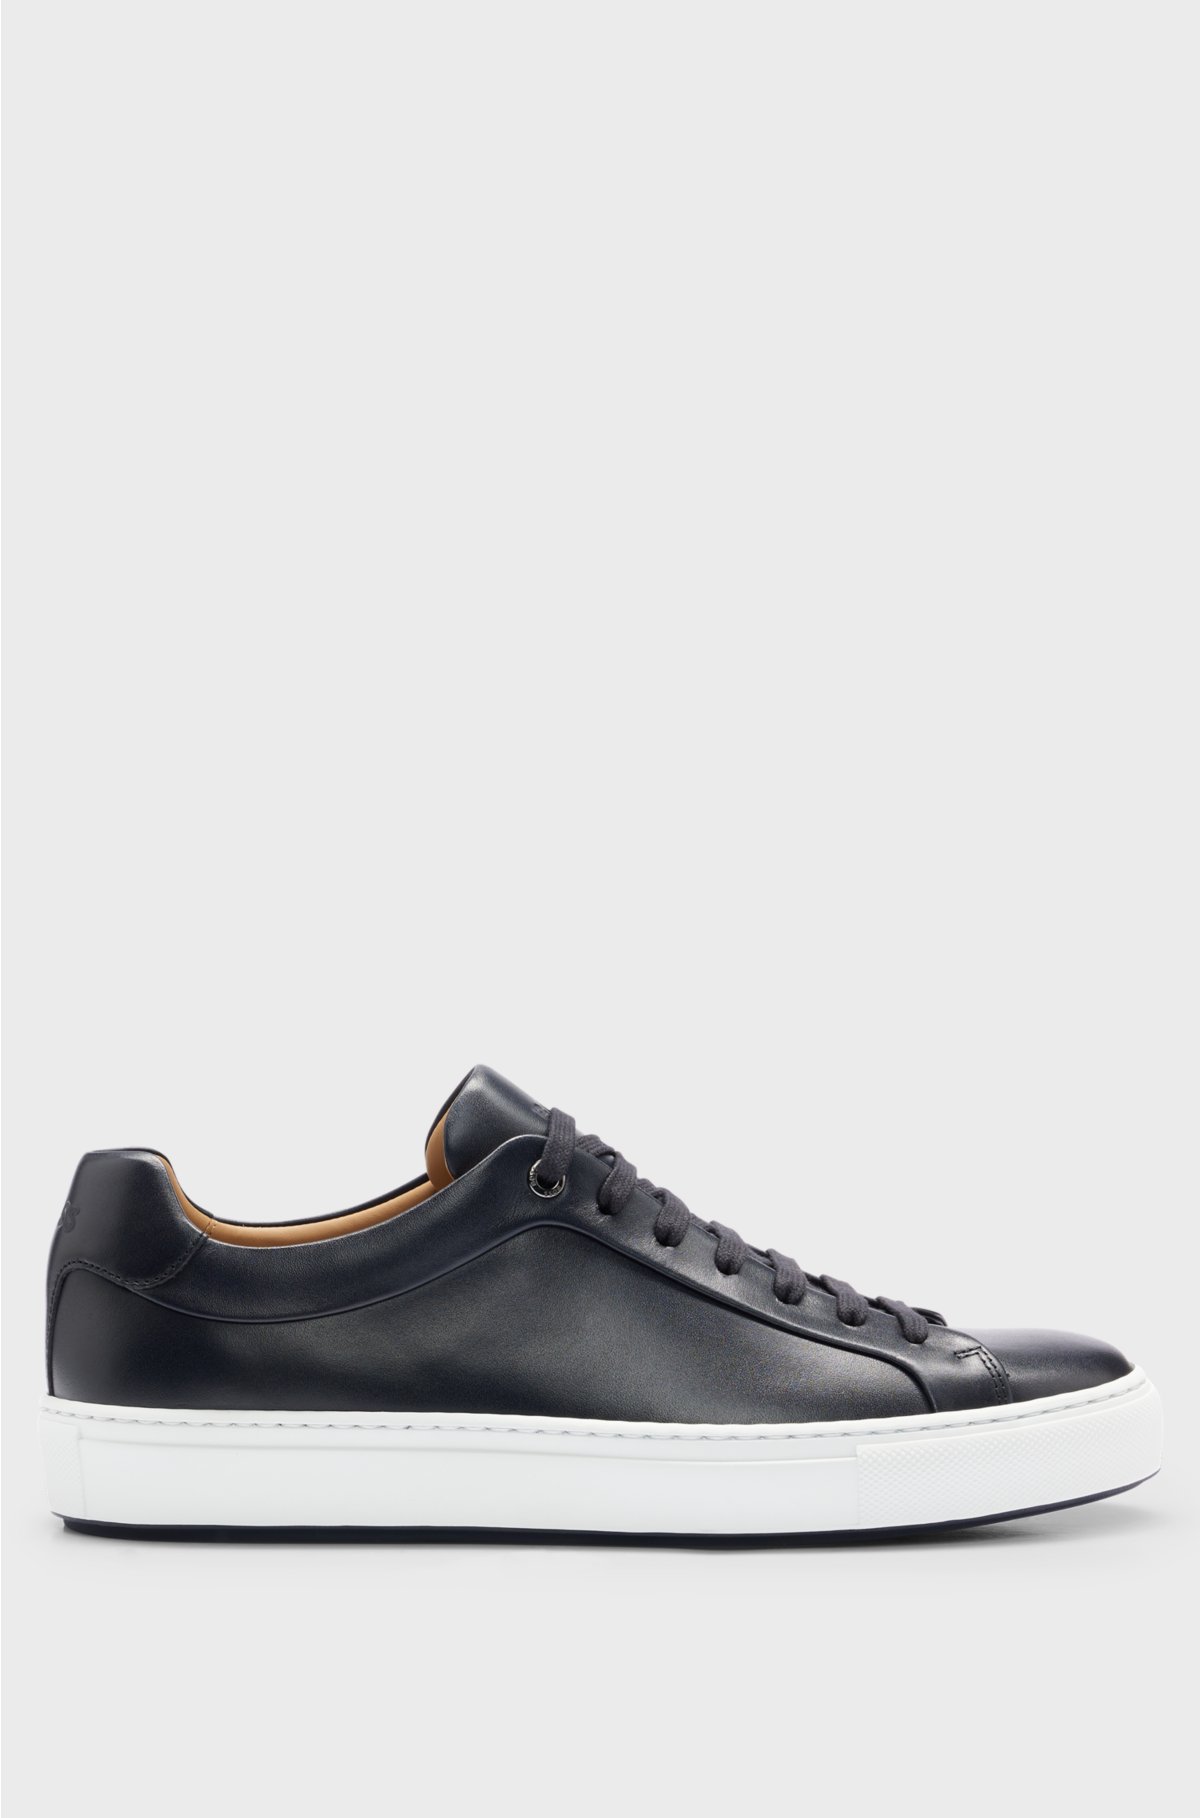 Leather cupsole trainers with logo details crafted in Italy, Dark Blue